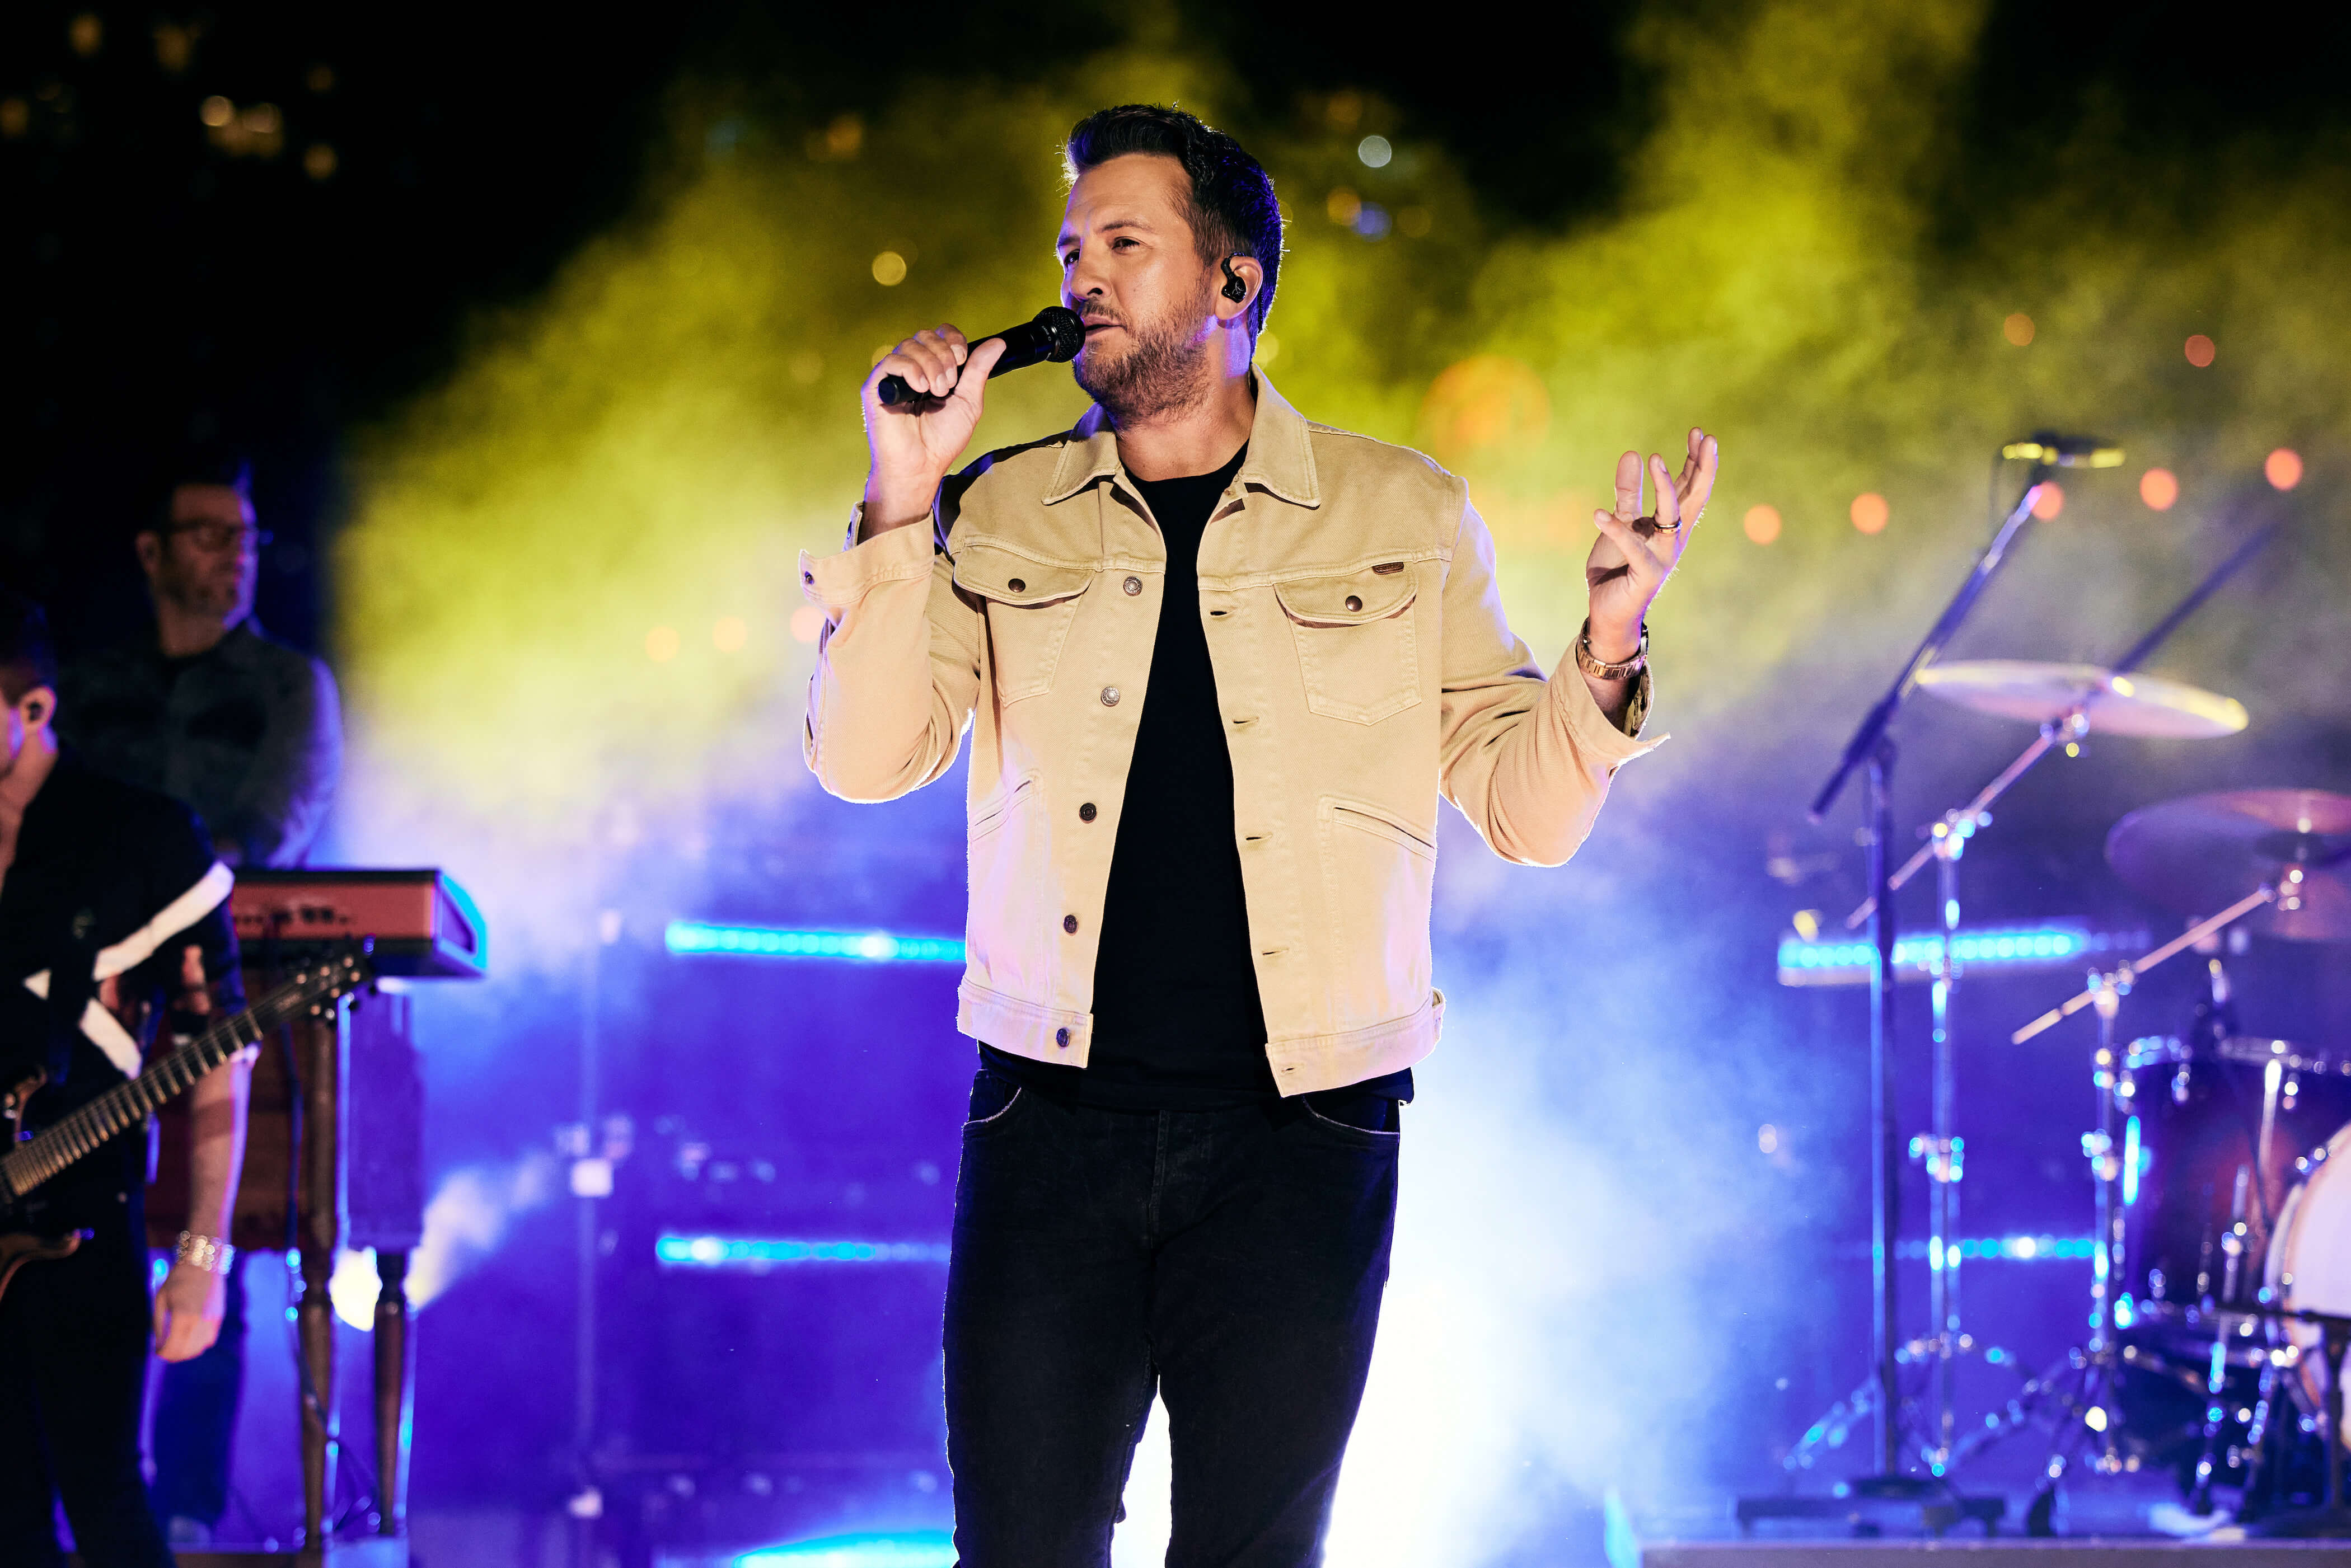 Luke Bryan performs onstage for the 2021 CMT Music Awards